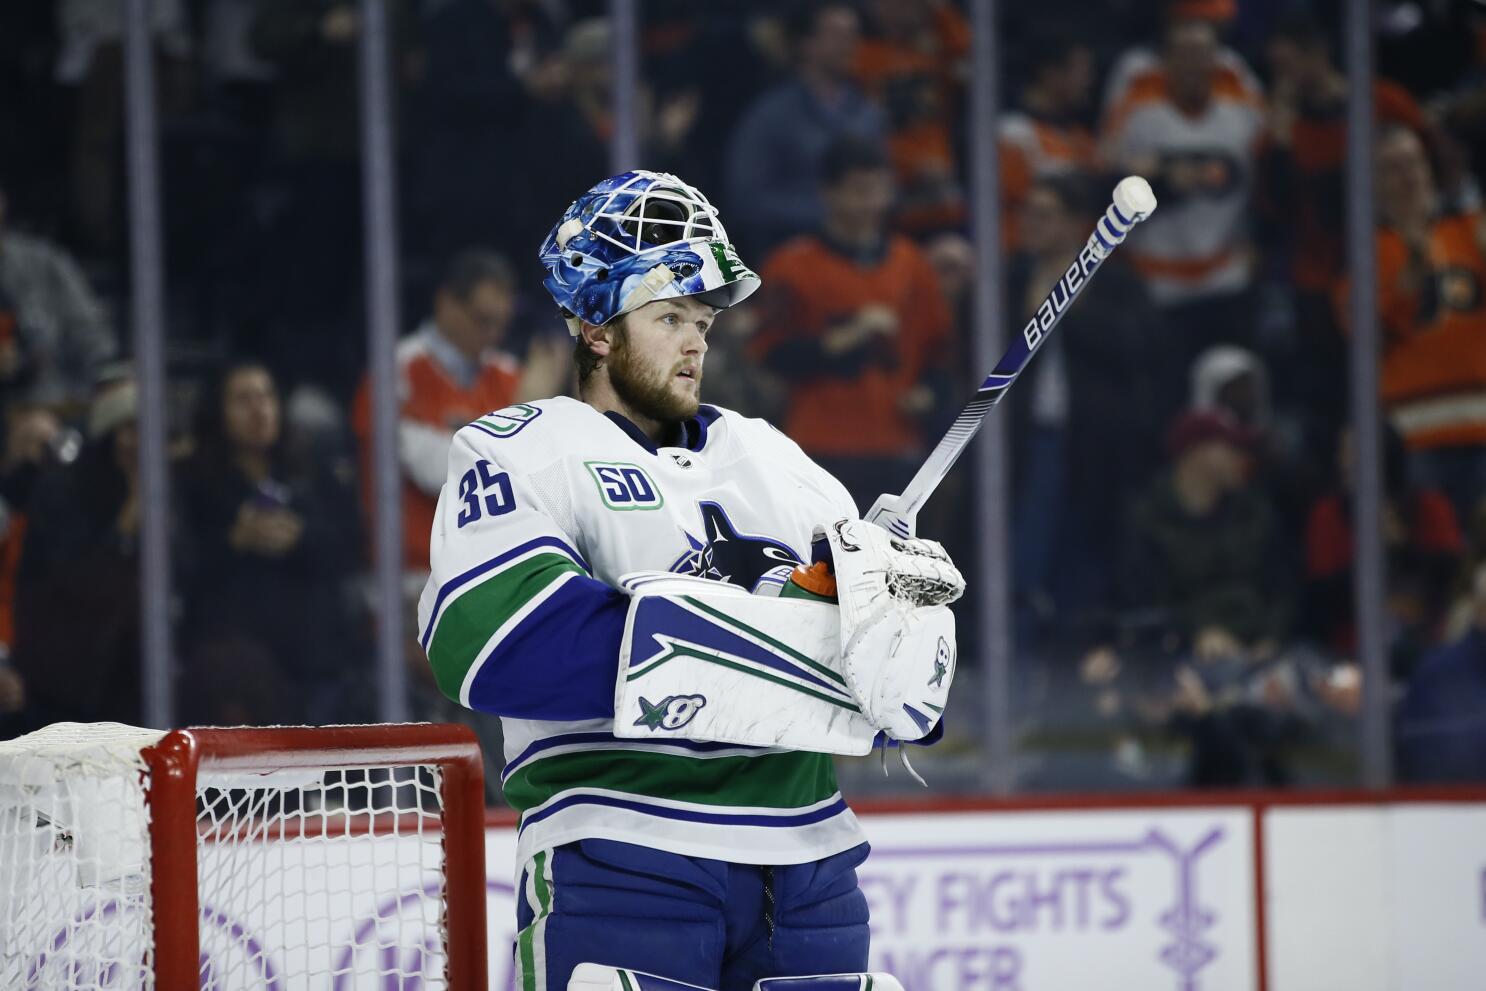 Canucks Under the Microscope: Who is Thatcher Demko